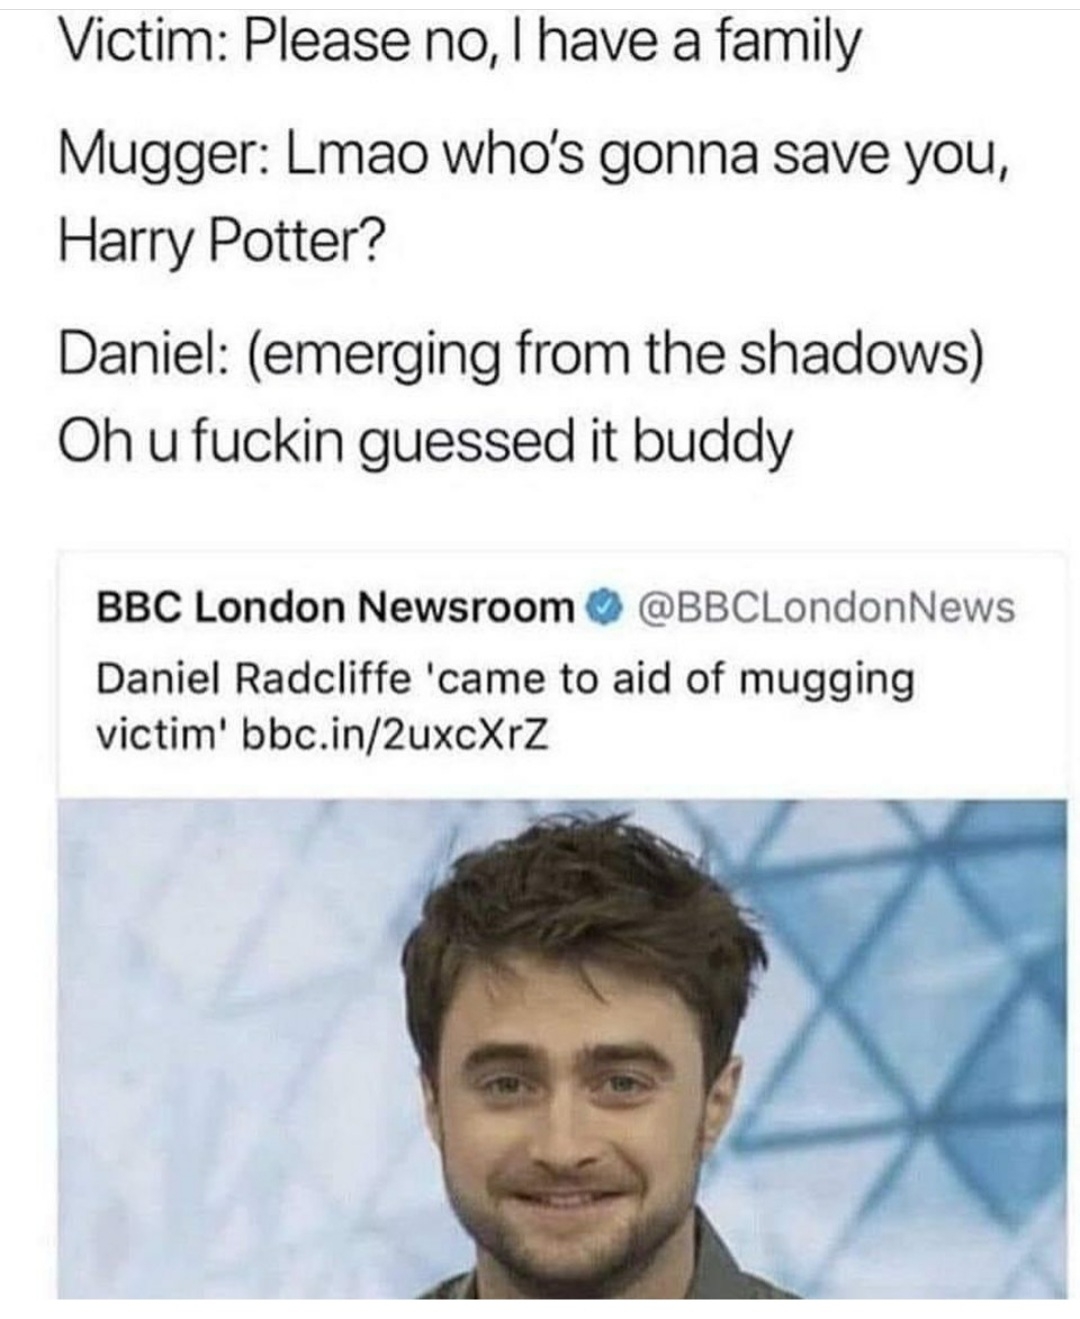 Potter to the rescue